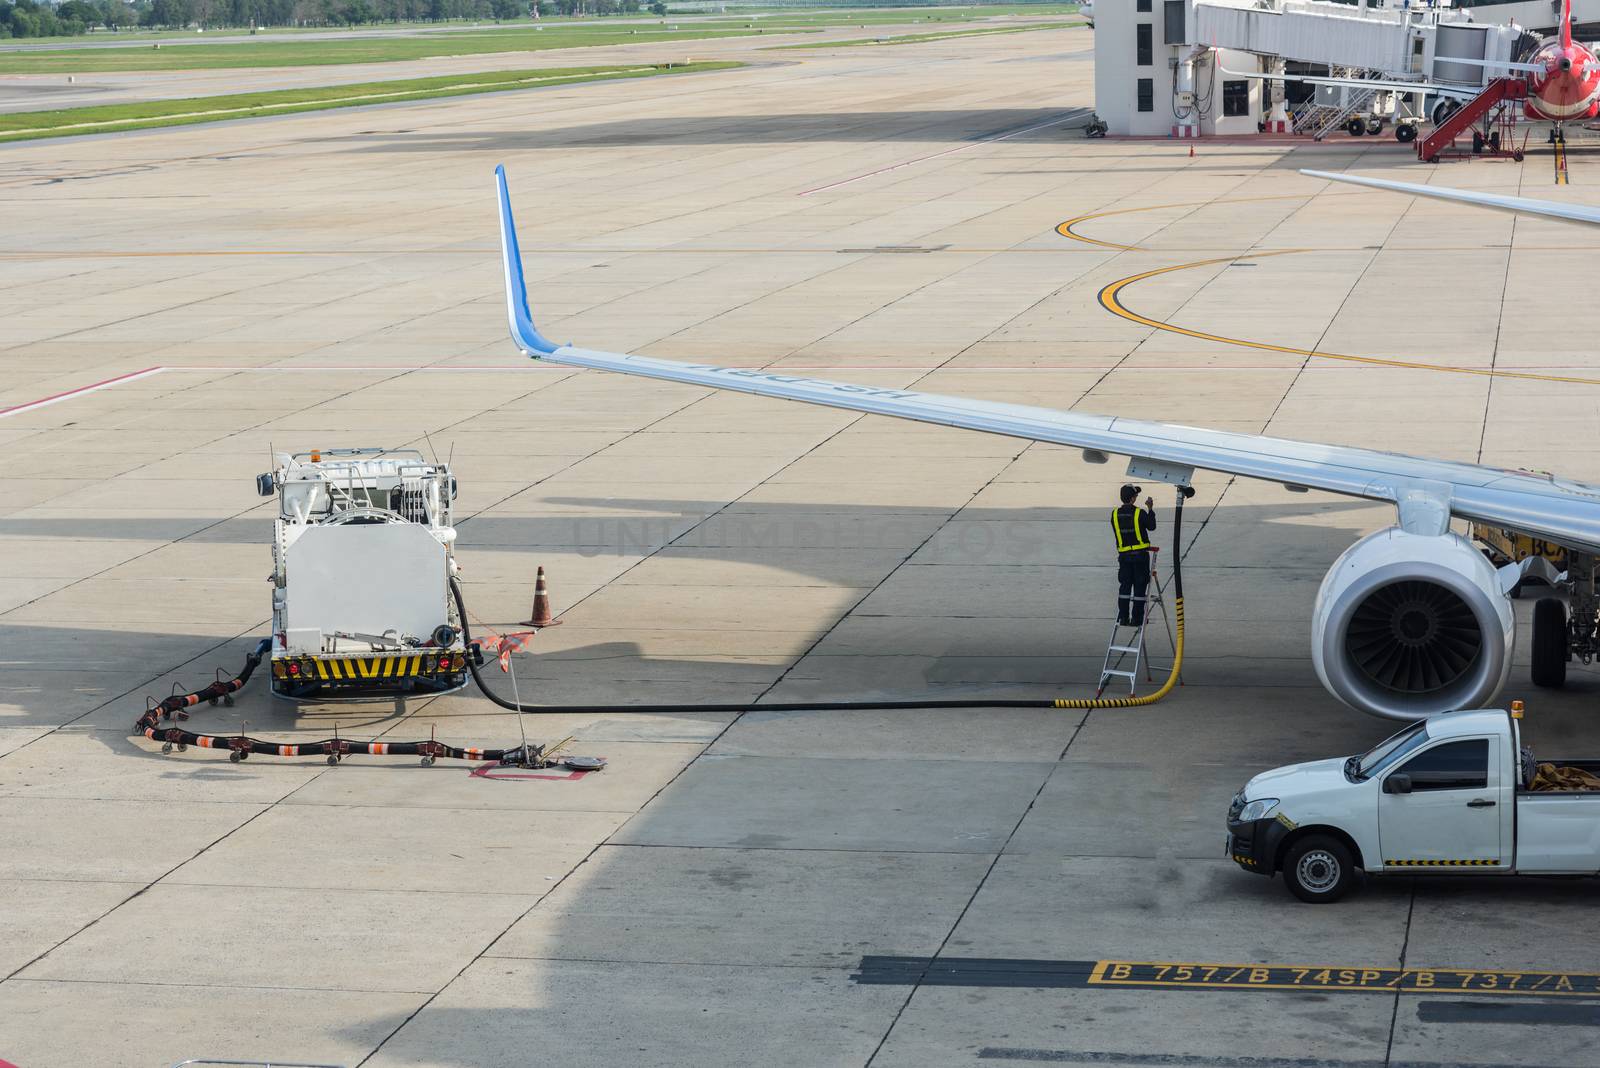 Airport man worker service refuelling the aircraft, runway